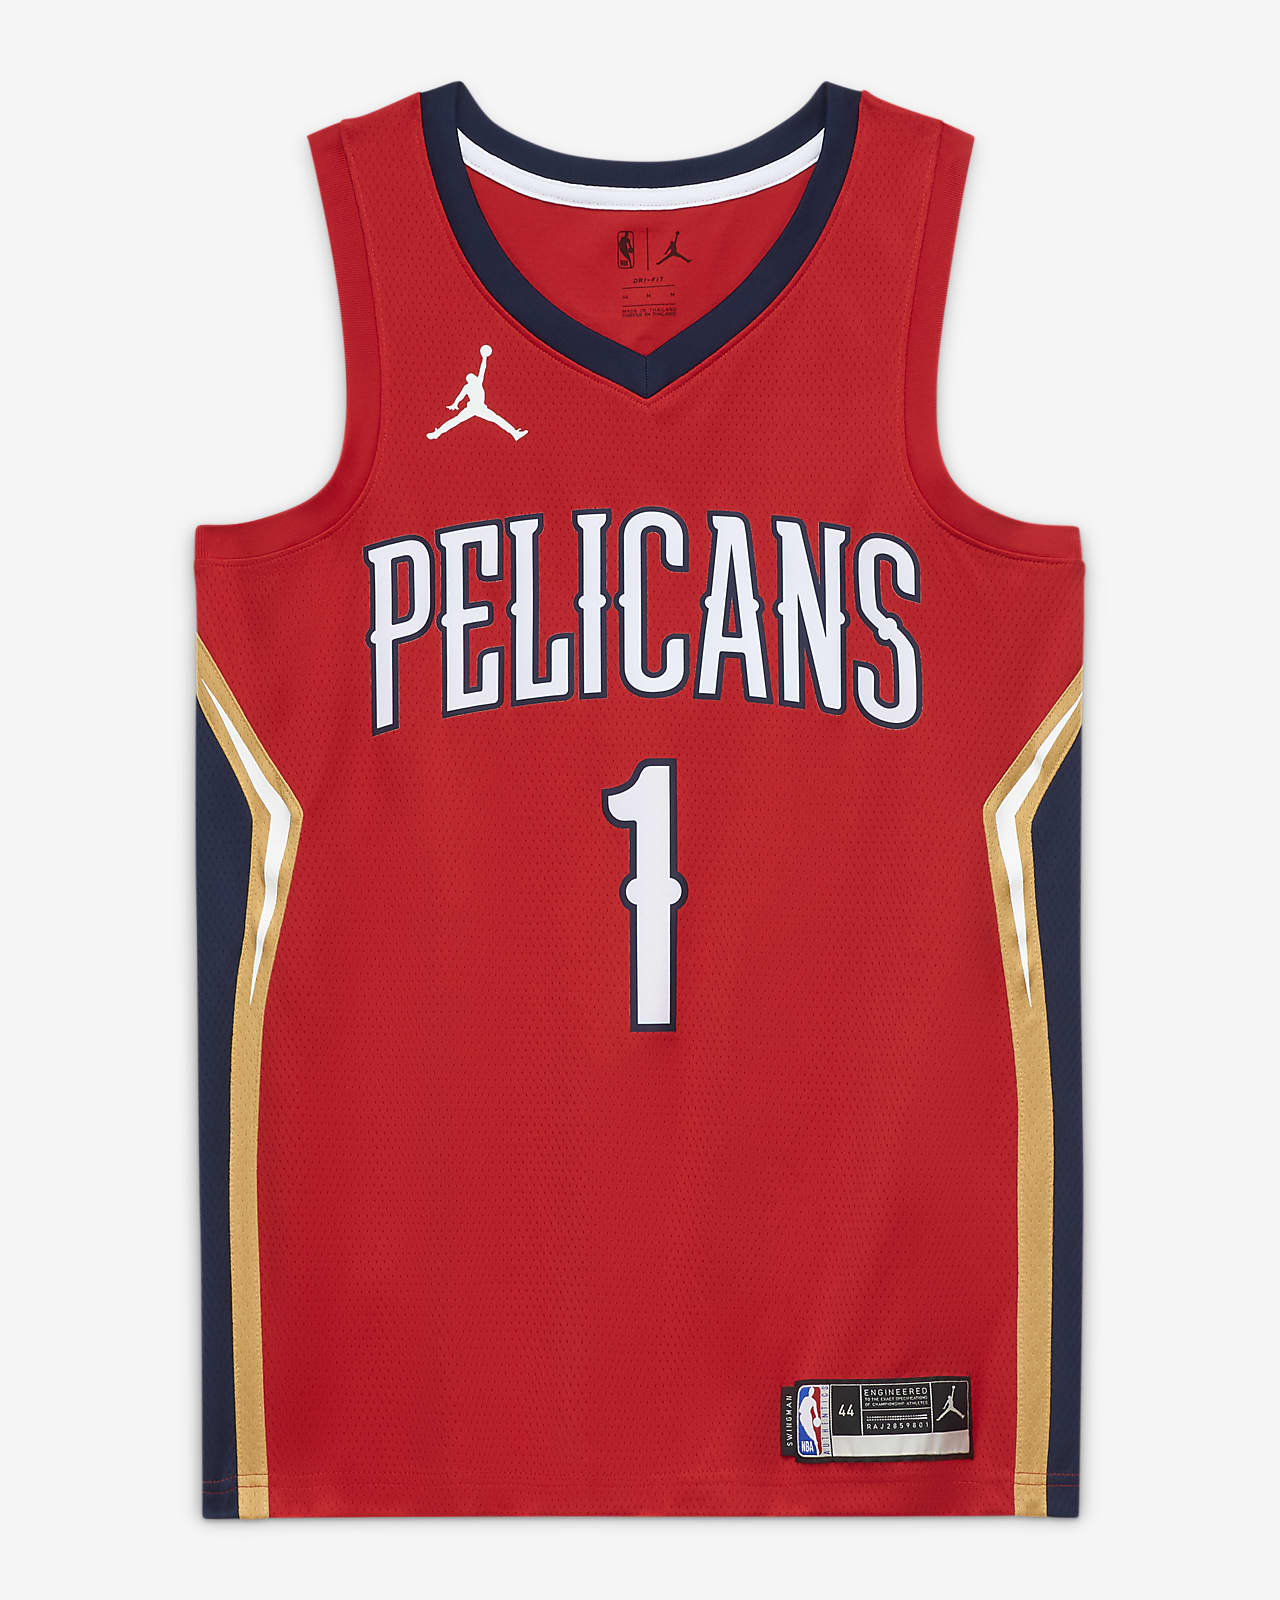 new orleans pelicans jersey 2020